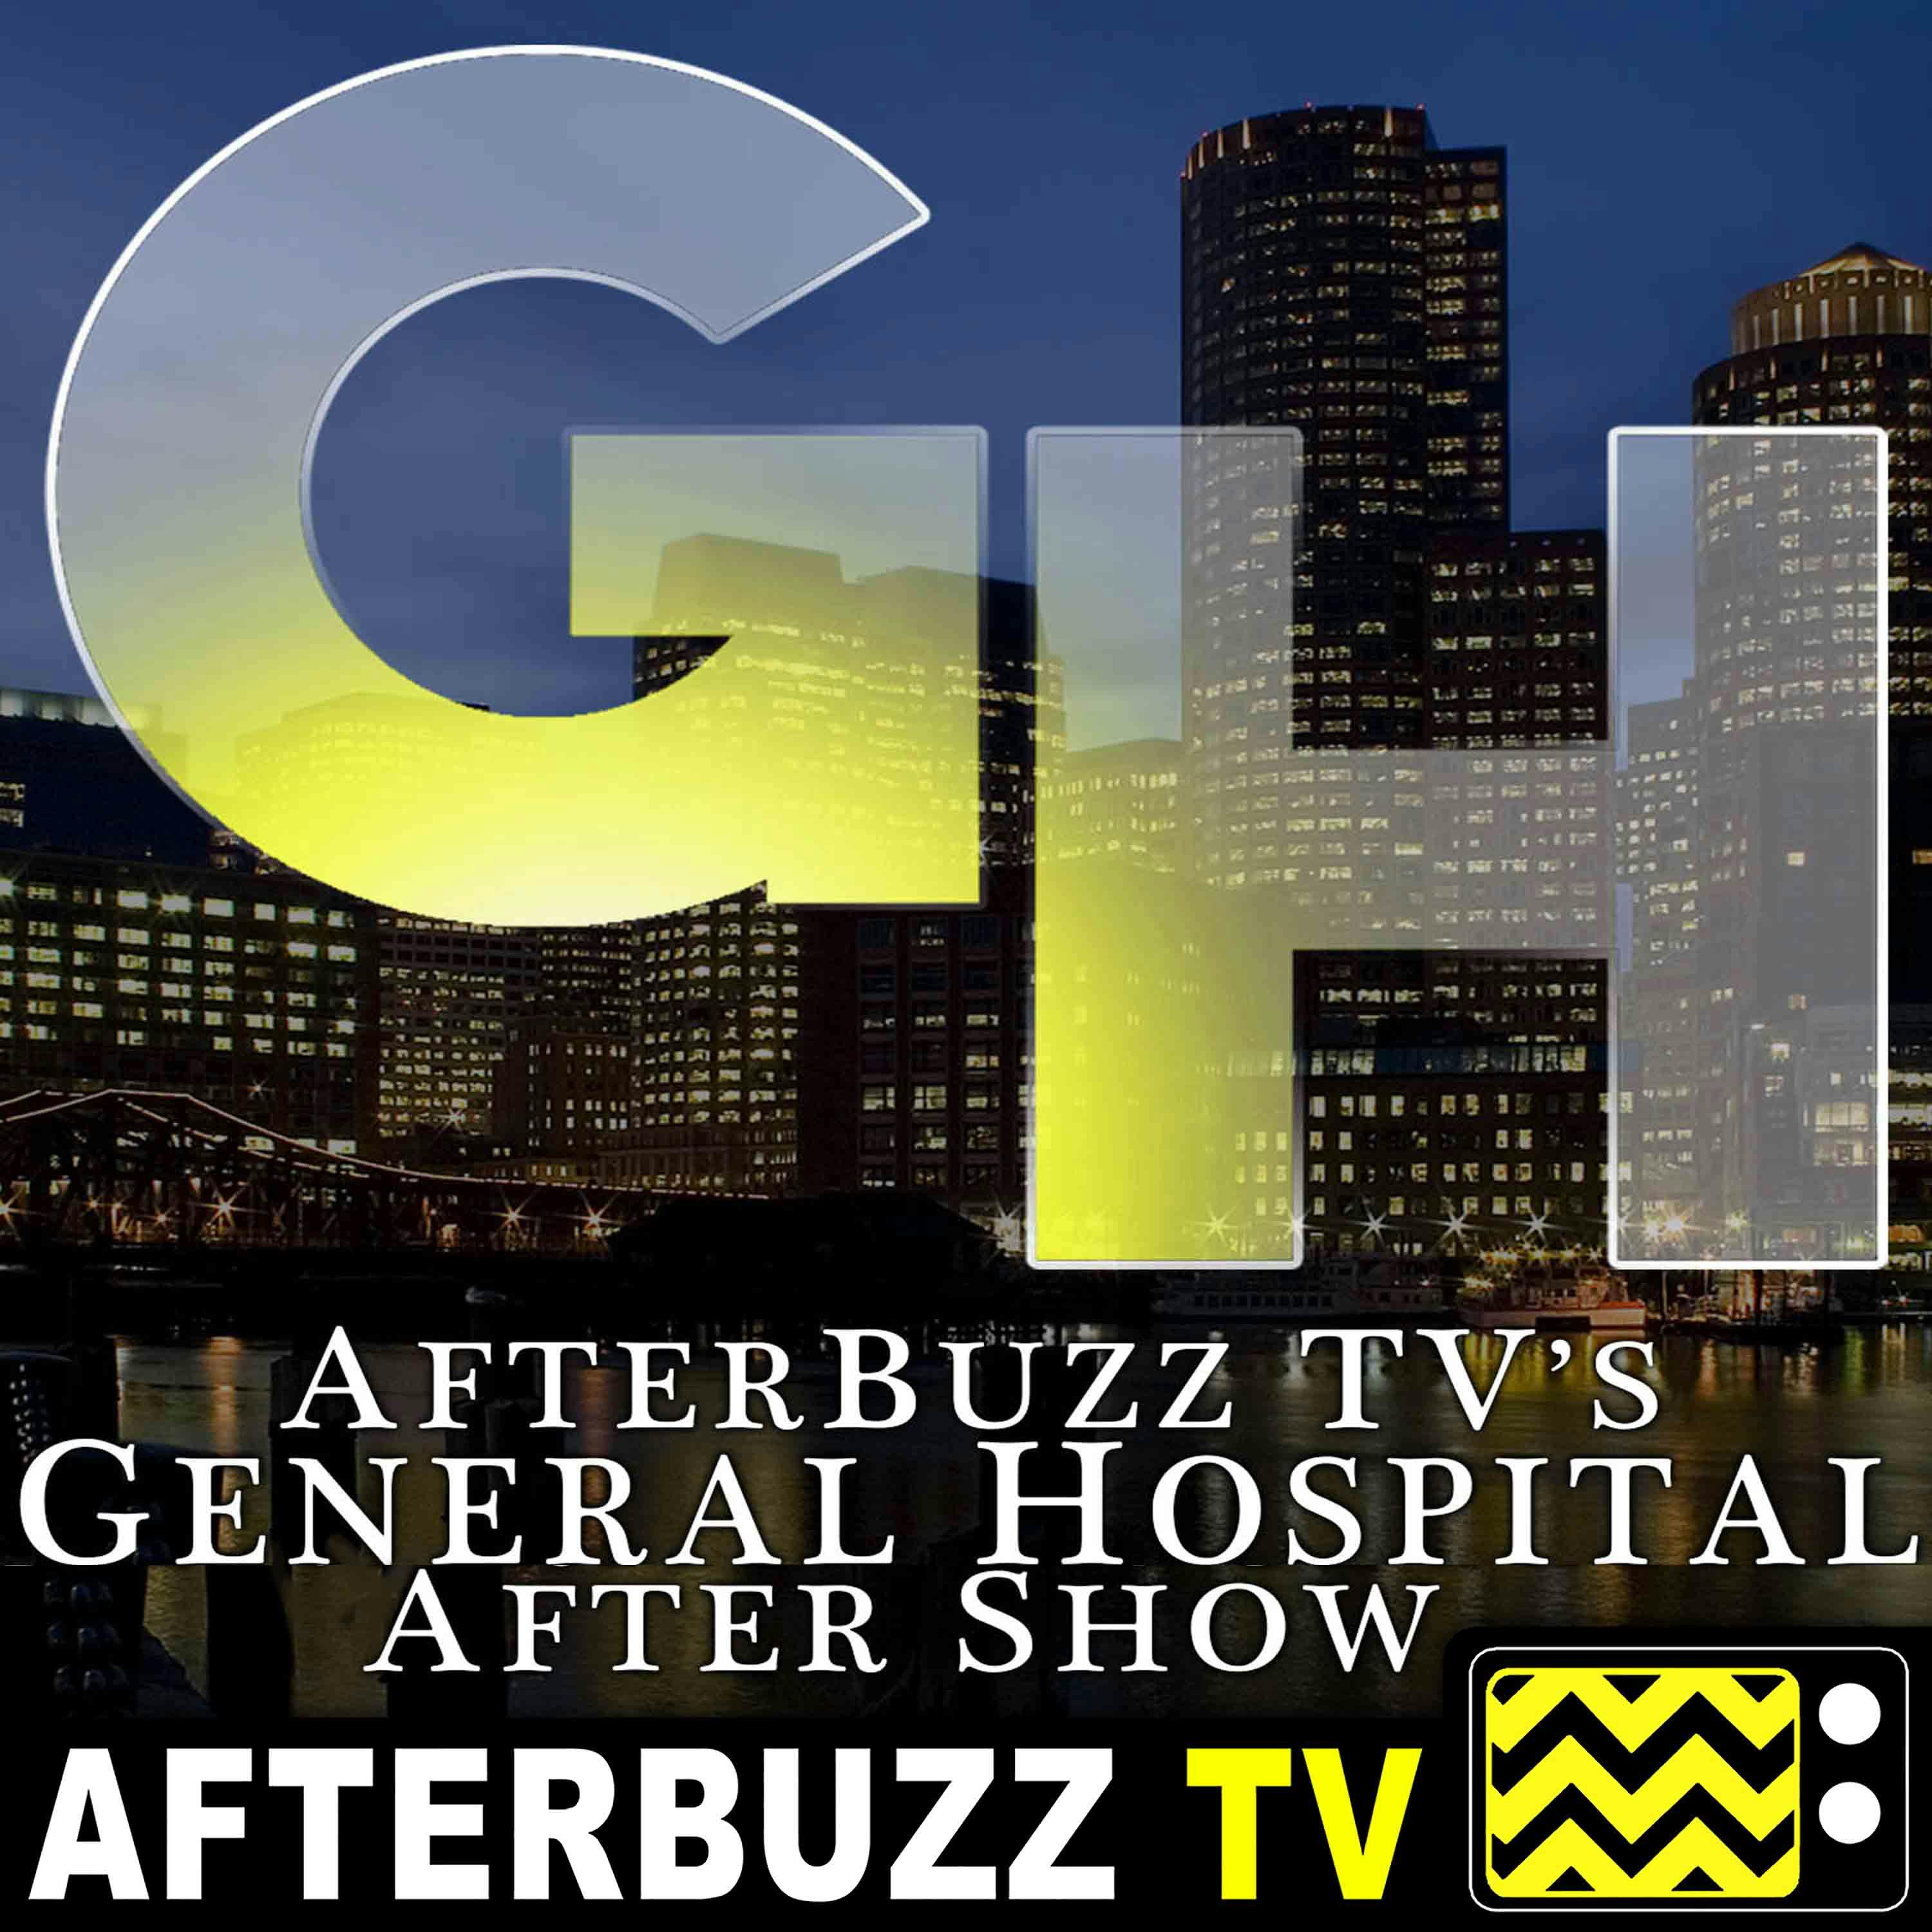 'April 29th - May 3rd, 2019' Review Of General Hospital